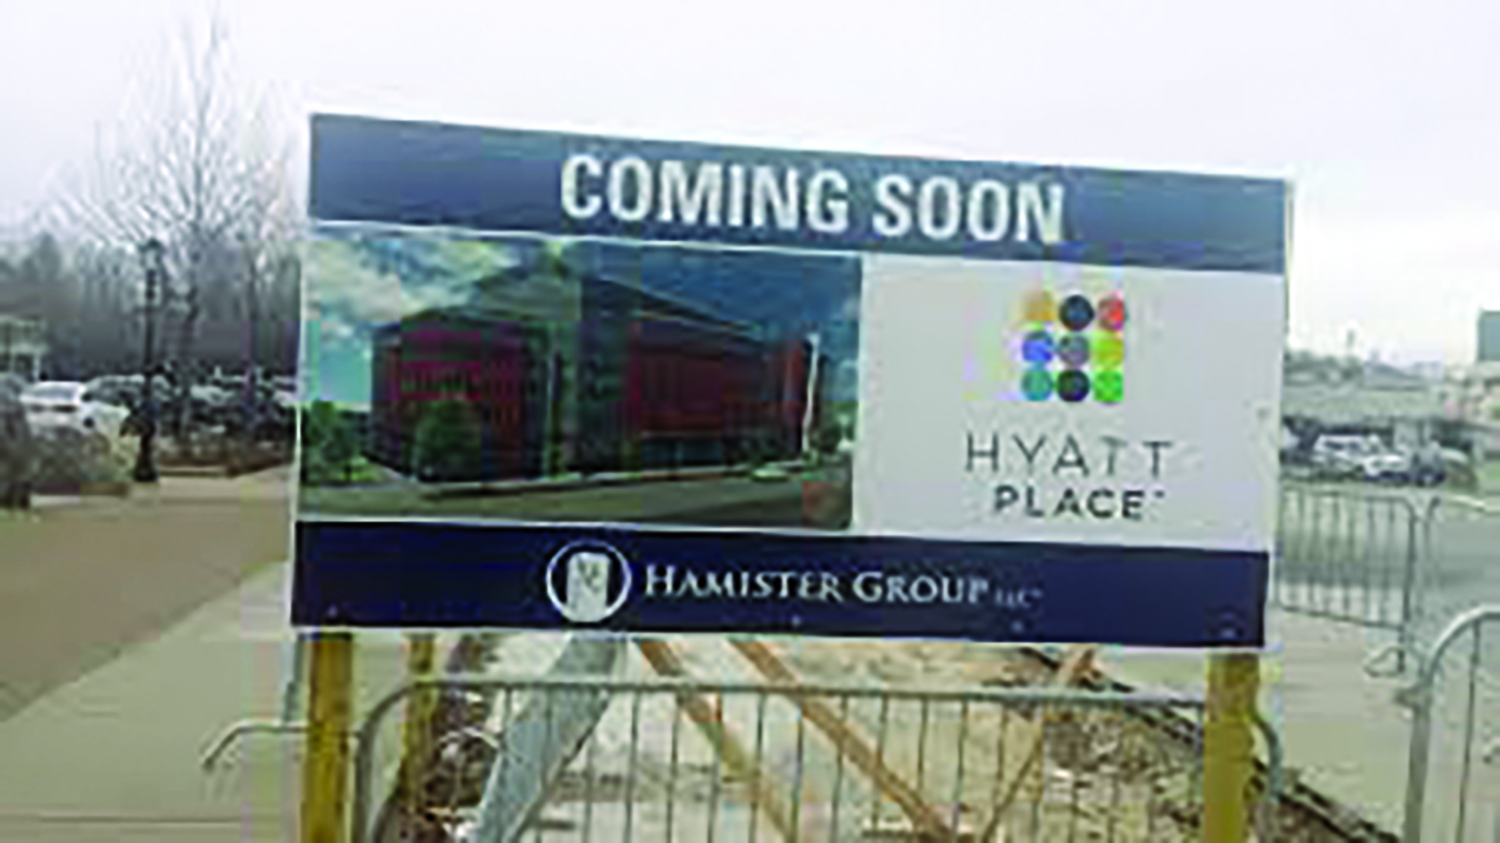 For years Hamister has promised to start building his ever cheaper hotel.